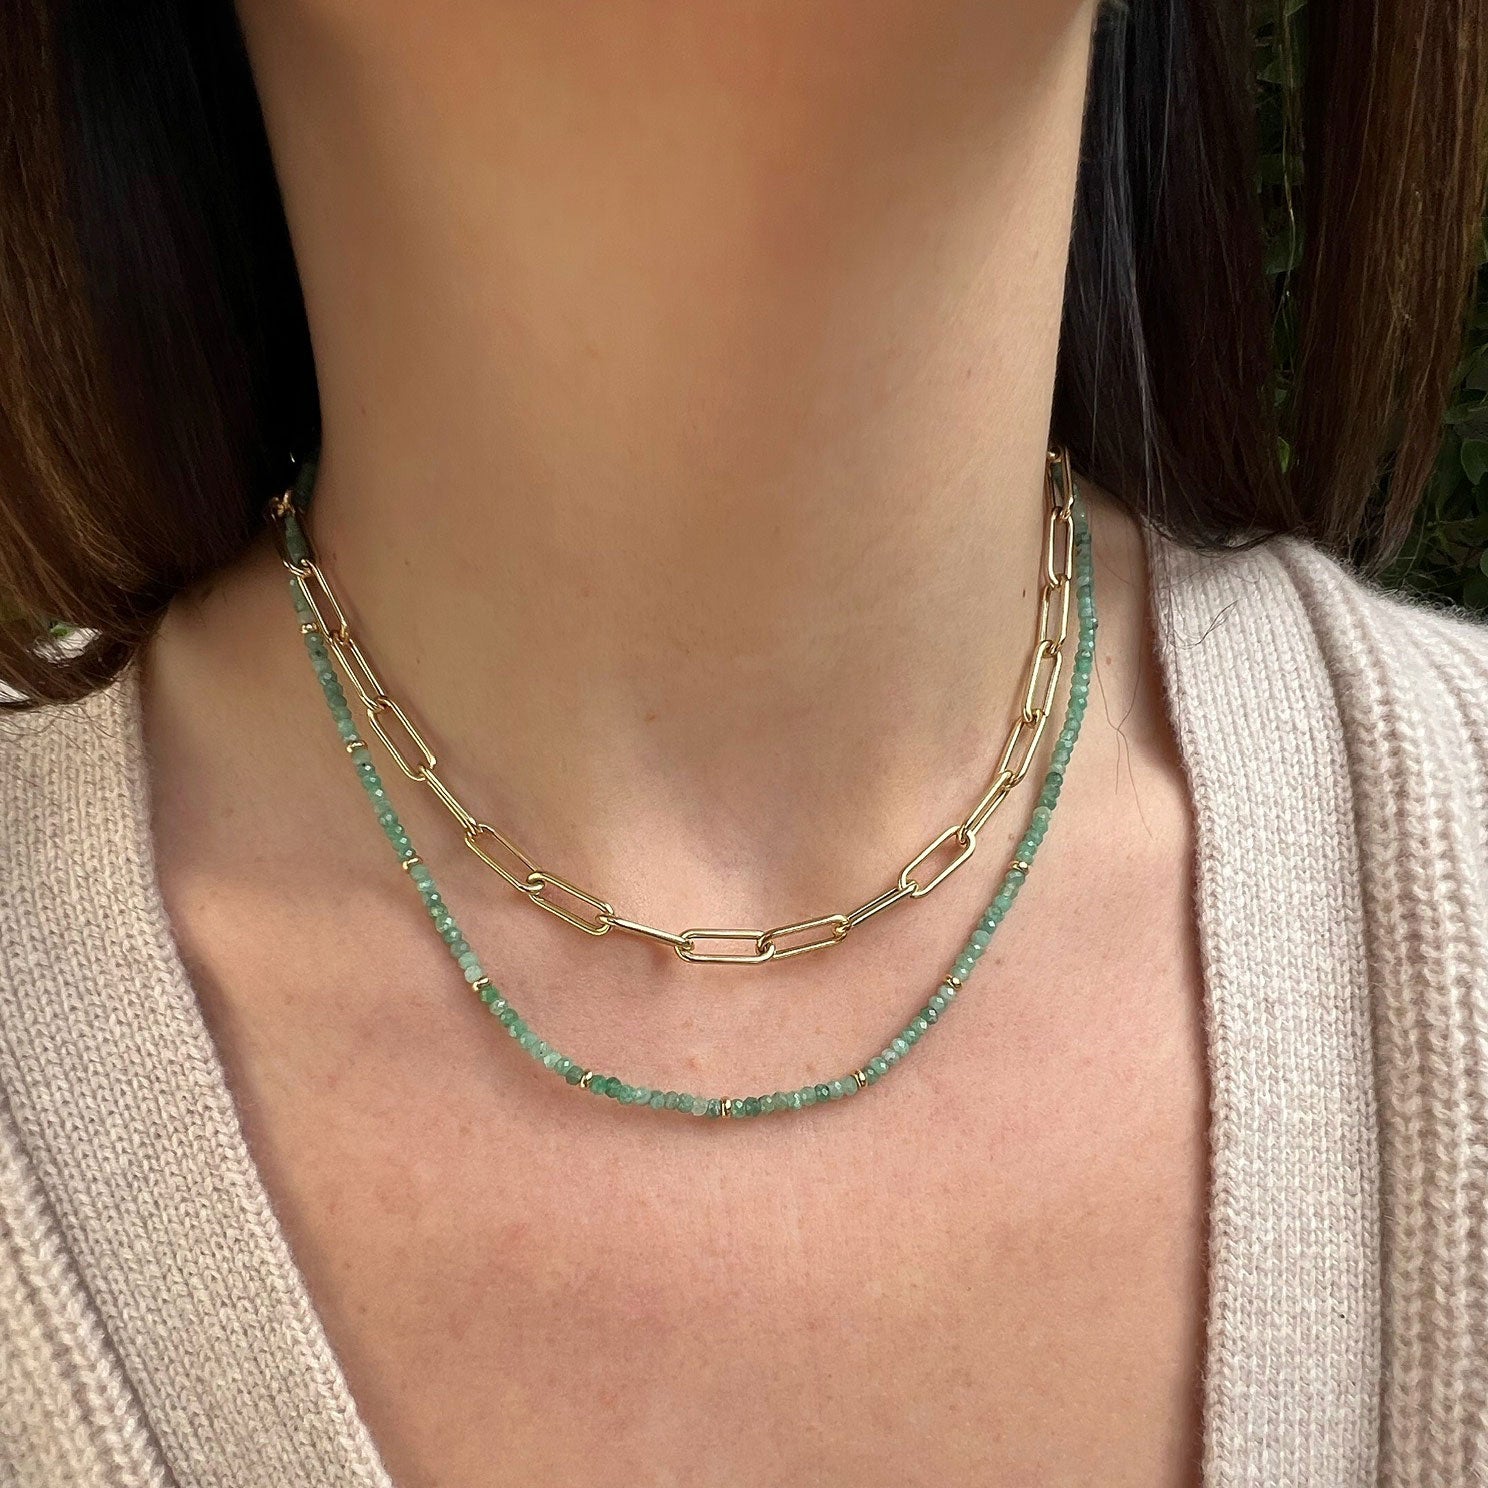 Birthstone Bead Necklace In Emerald styled on neck with 14k yellow gold jumbo chain necklace and wearing tan sweater